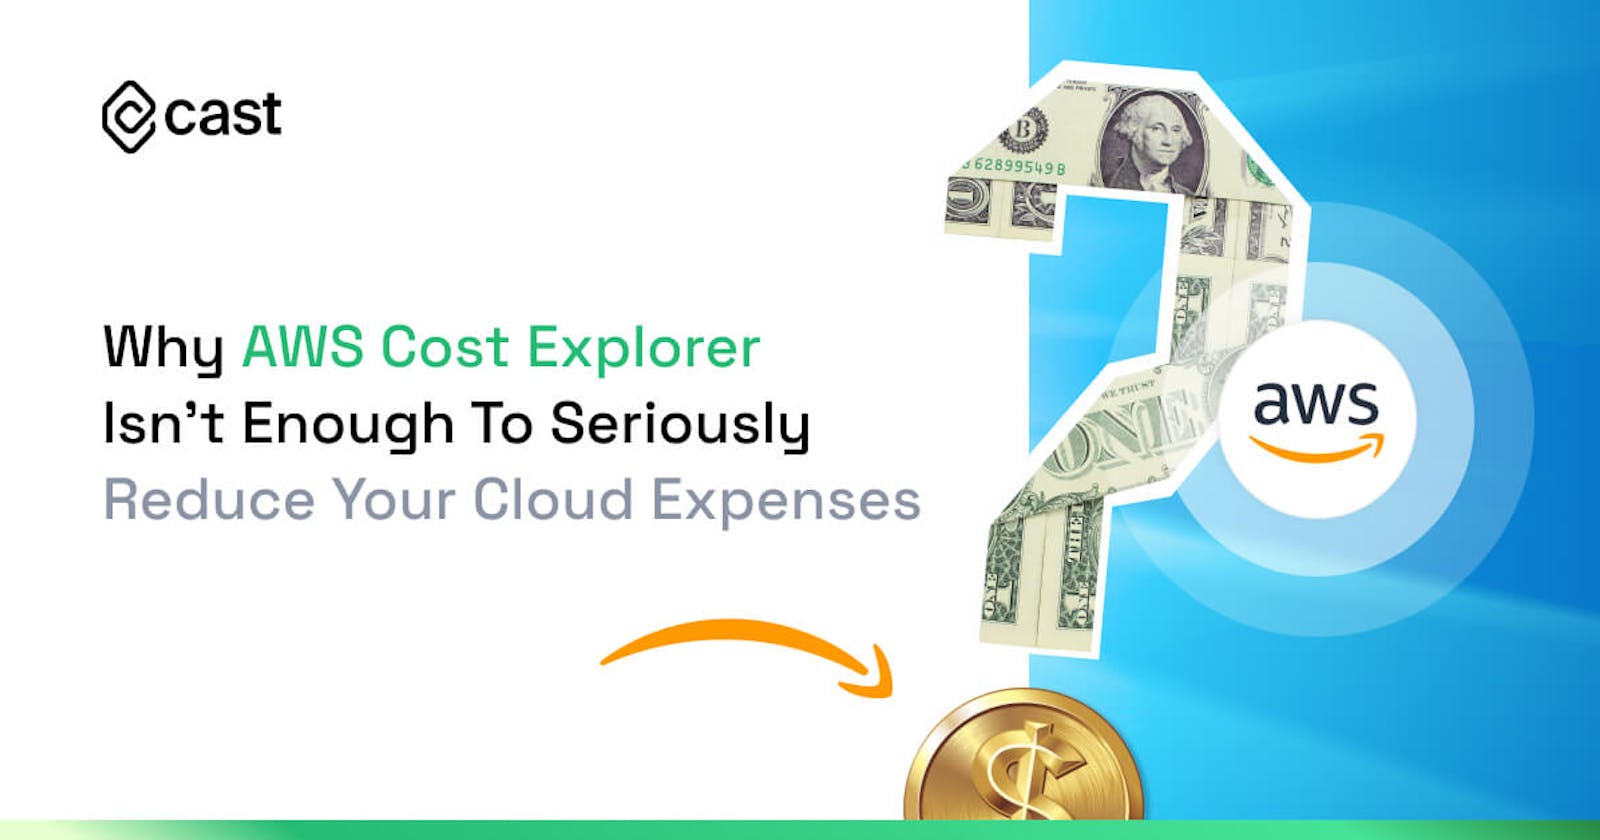 Why AWS Cost Explorer Isn’t Enough to Seriously Reduce Your Cloud Expenses